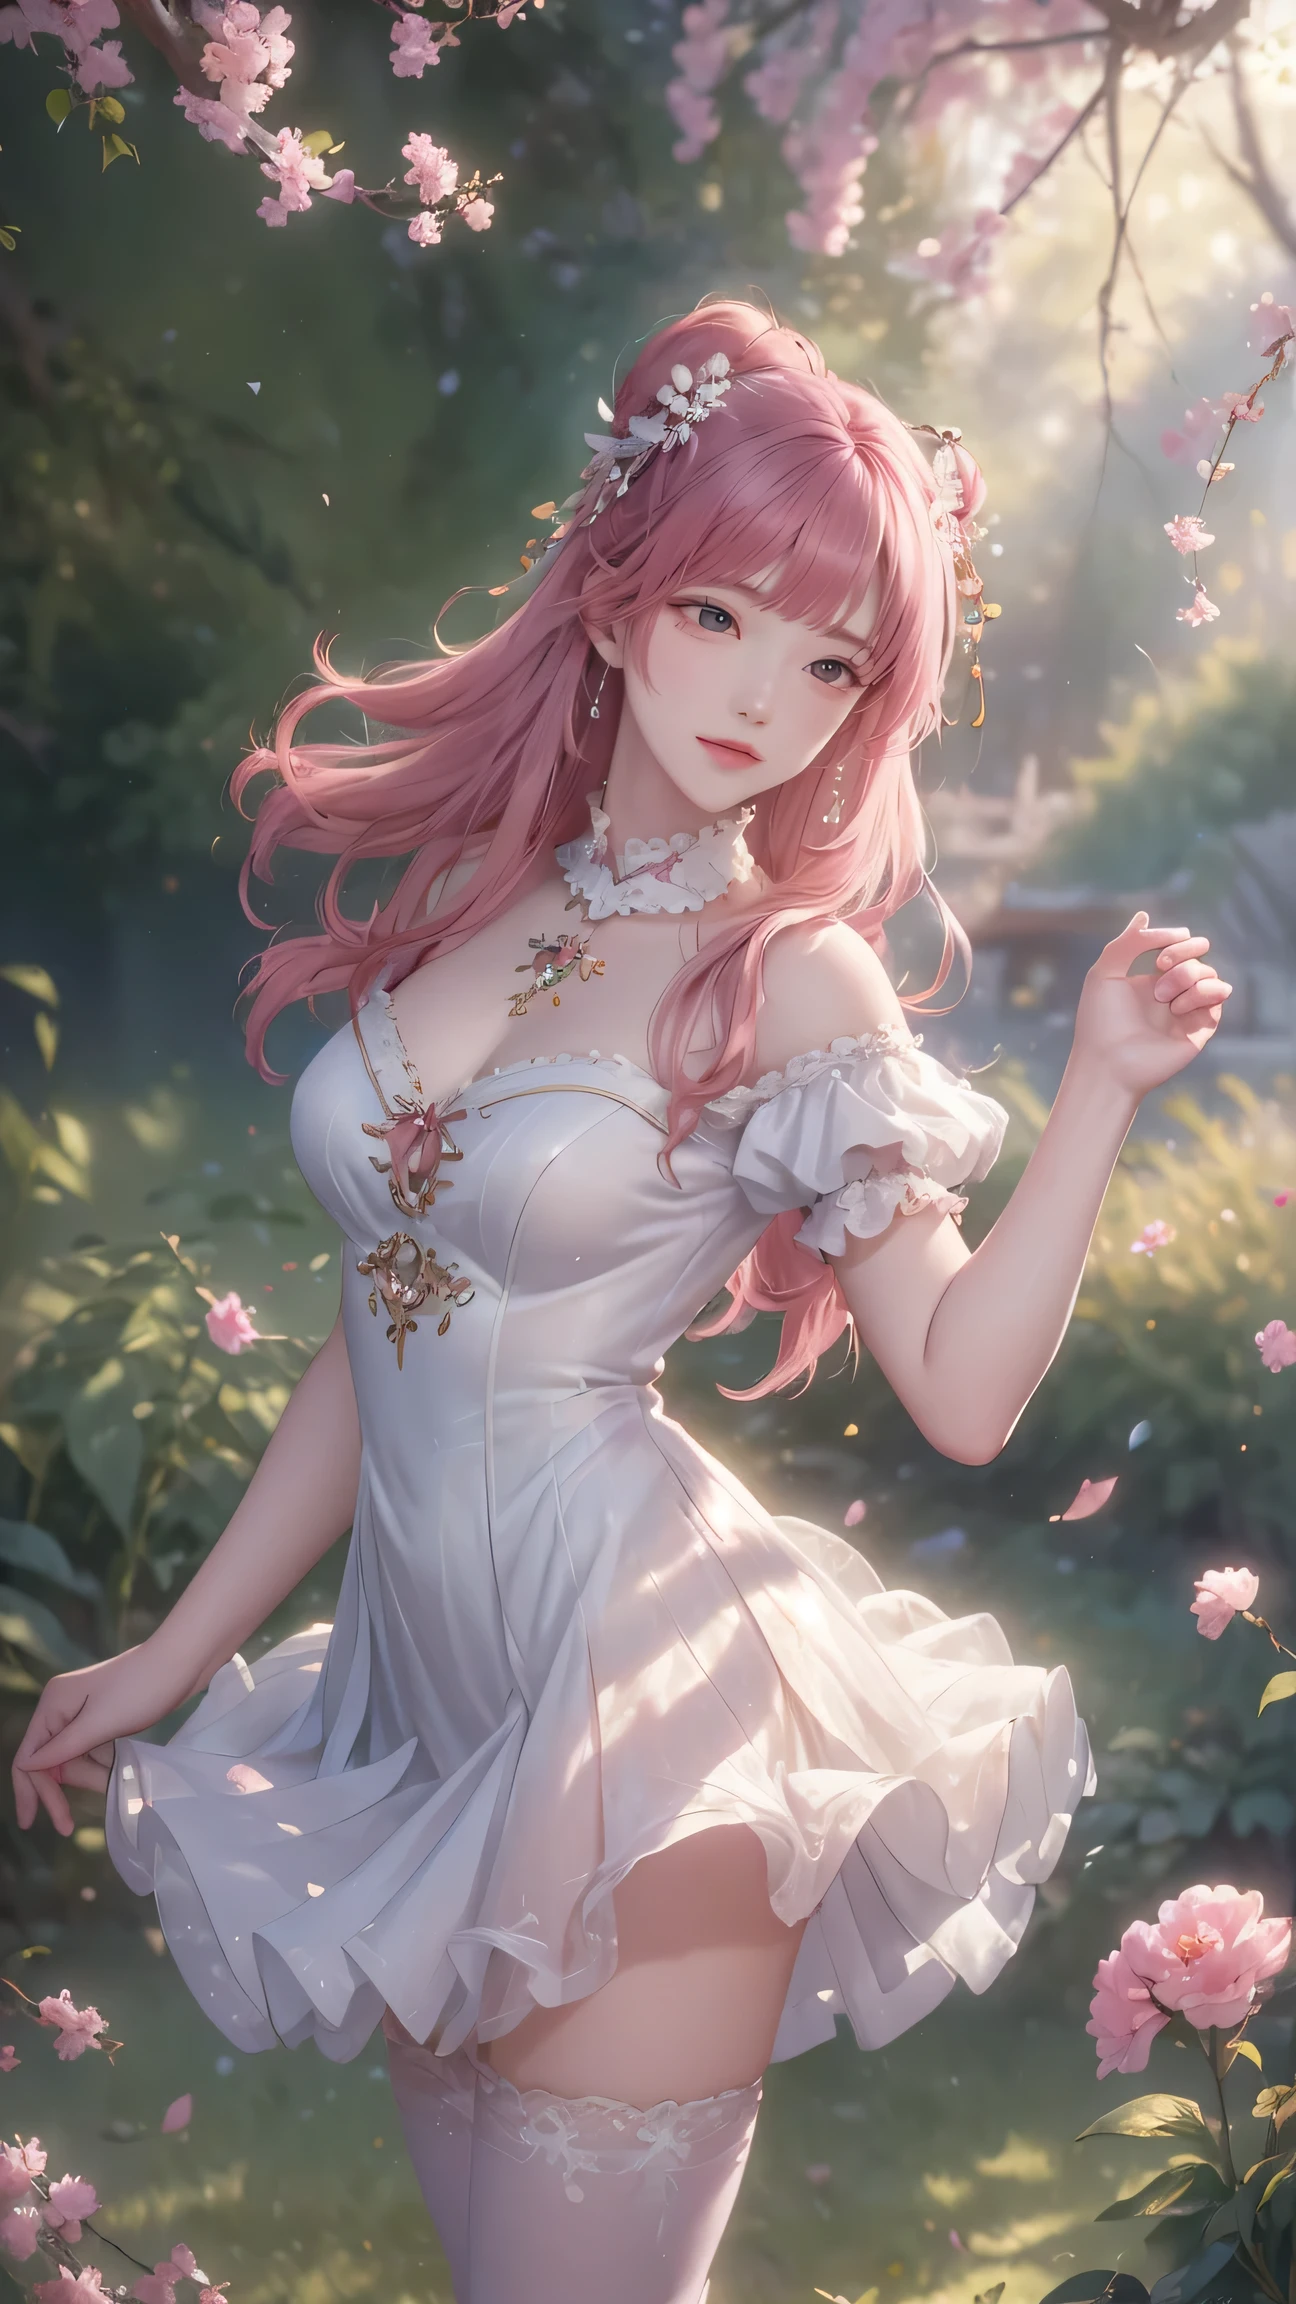 (best quality,ultra-detailed,photorealistic:1.37),vivid colors,studio lighting,beautiful detailed eyes,beautiful detailed lips,extremely detailed eyes and face,long eyelashes,portraits, short hair, pink hair,confident expression,feminine,standing in a garden,soft sunlight, scenery,flower blossoms,peaceful atmosphere,artistic touch,textured brushstrokes,subtle color variations,brilliant white highlights,delicate movements,graceful pose,slight breeze,rustling leaves,sophisticated style,professional artwork,female beauty.